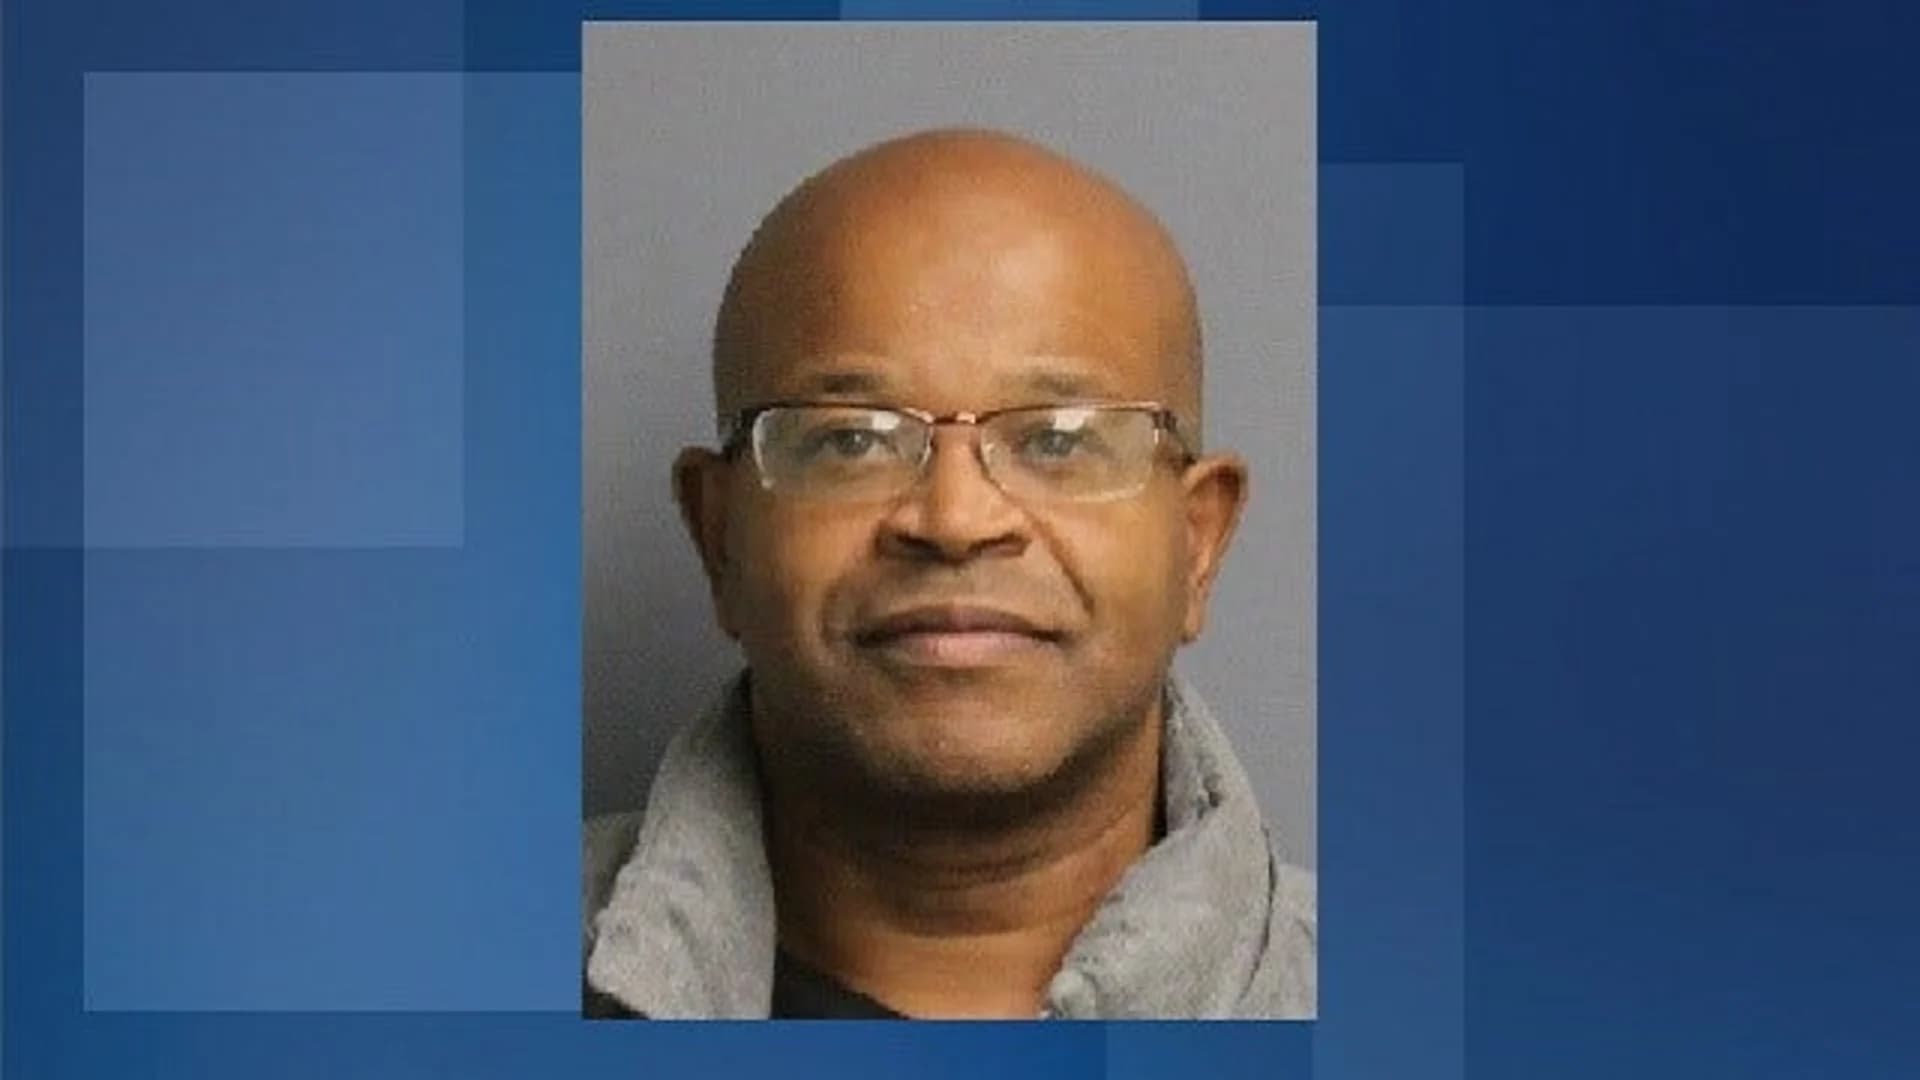 No bail for choir teacher accused of sexually assaulting boy